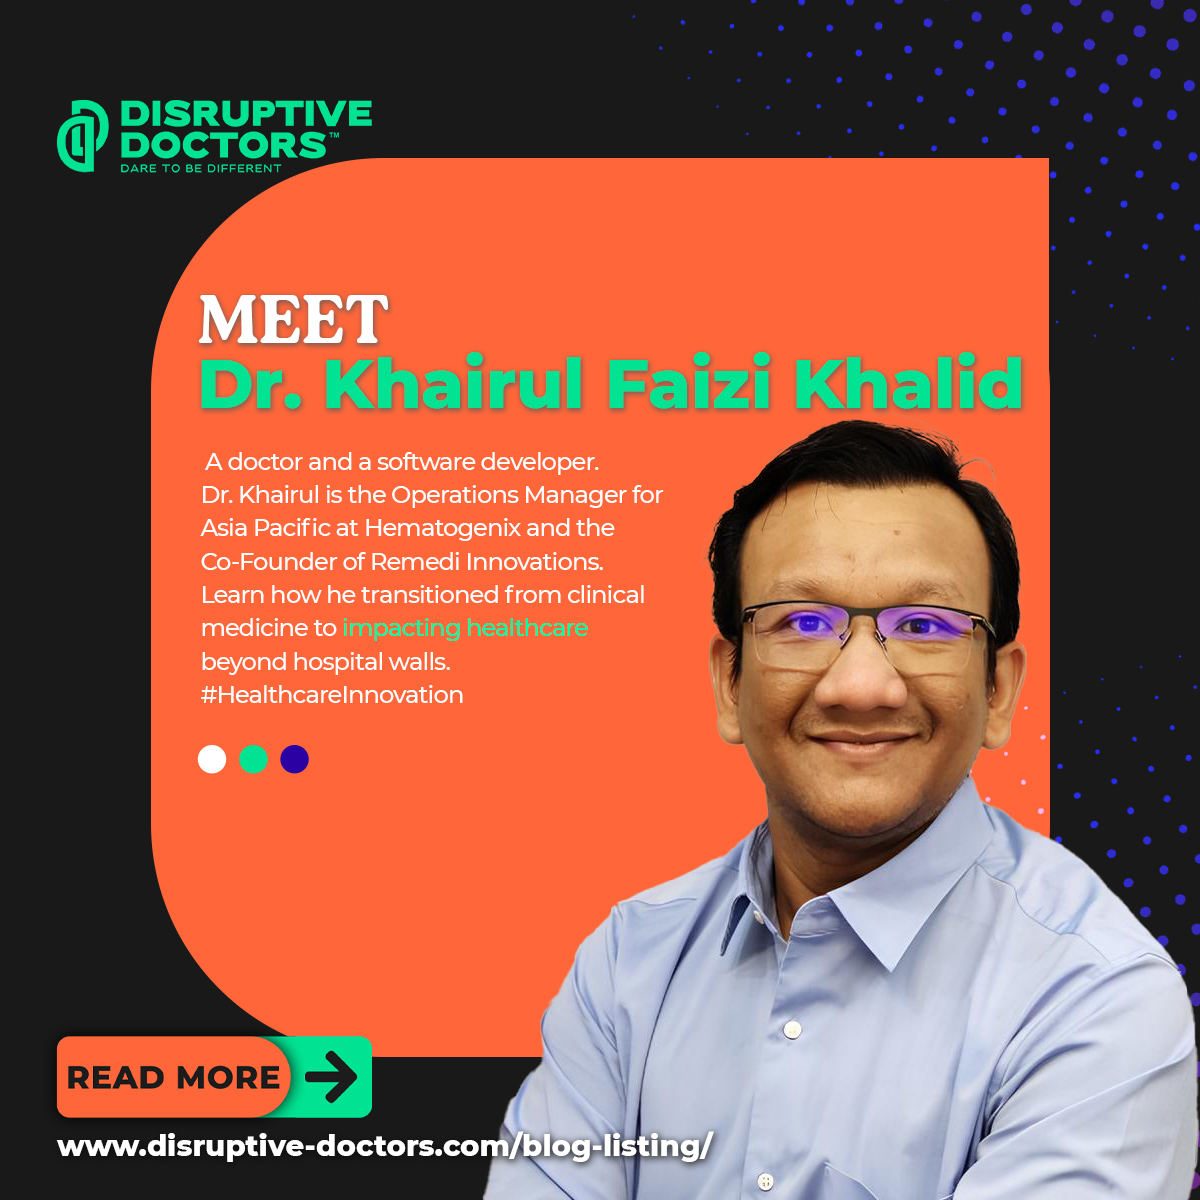 Dr. Khairul's Journey: Dr. Khairul's passion for medicine led him to explore new avenues to serve patients outside the hospital. Discover how he successfully transitioned from clinical medicine to healthcare innovation and technology